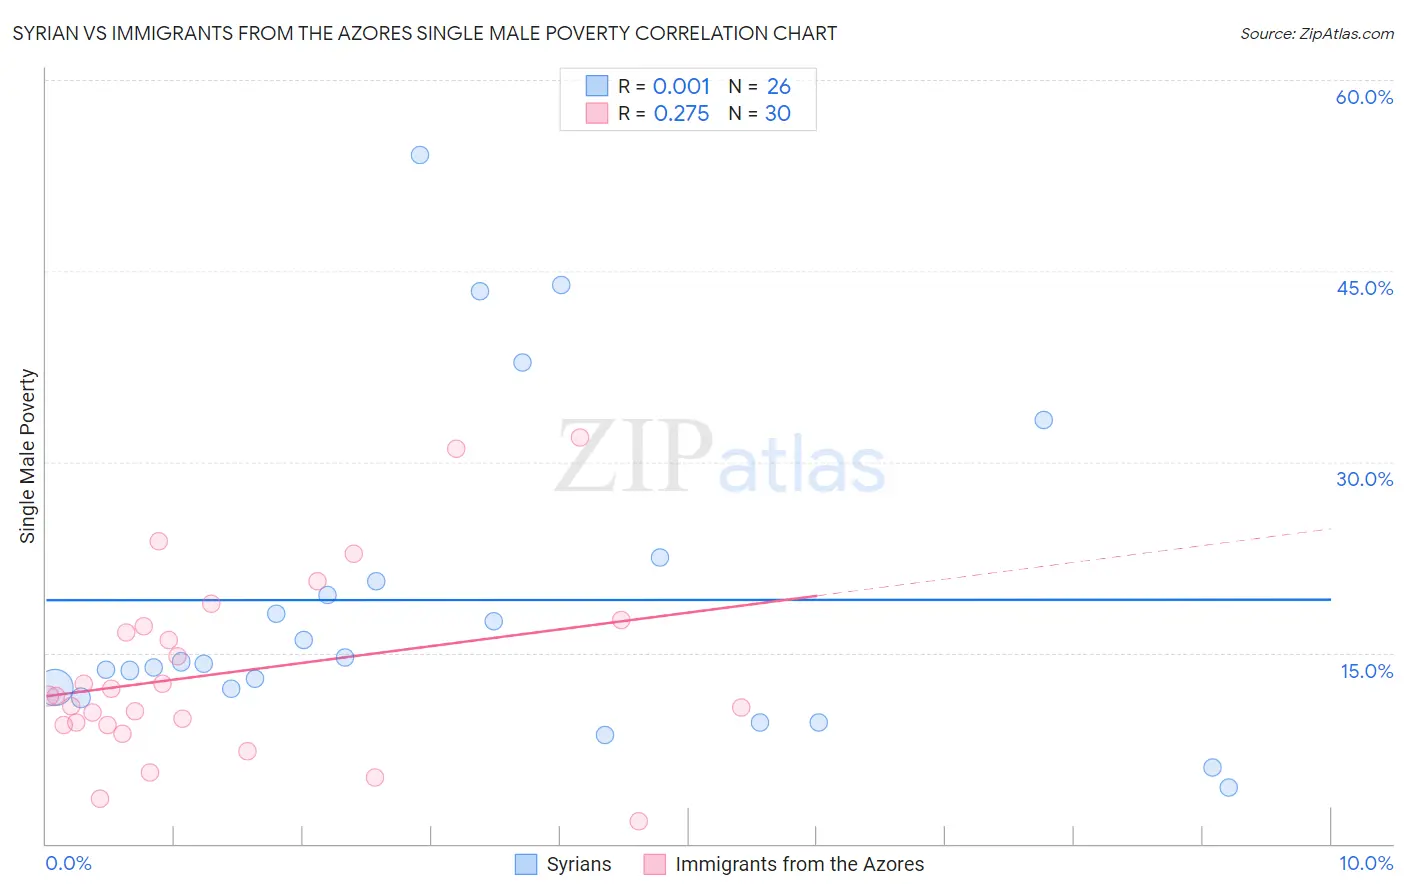 Syrian vs Immigrants from the Azores Single Male Poverty